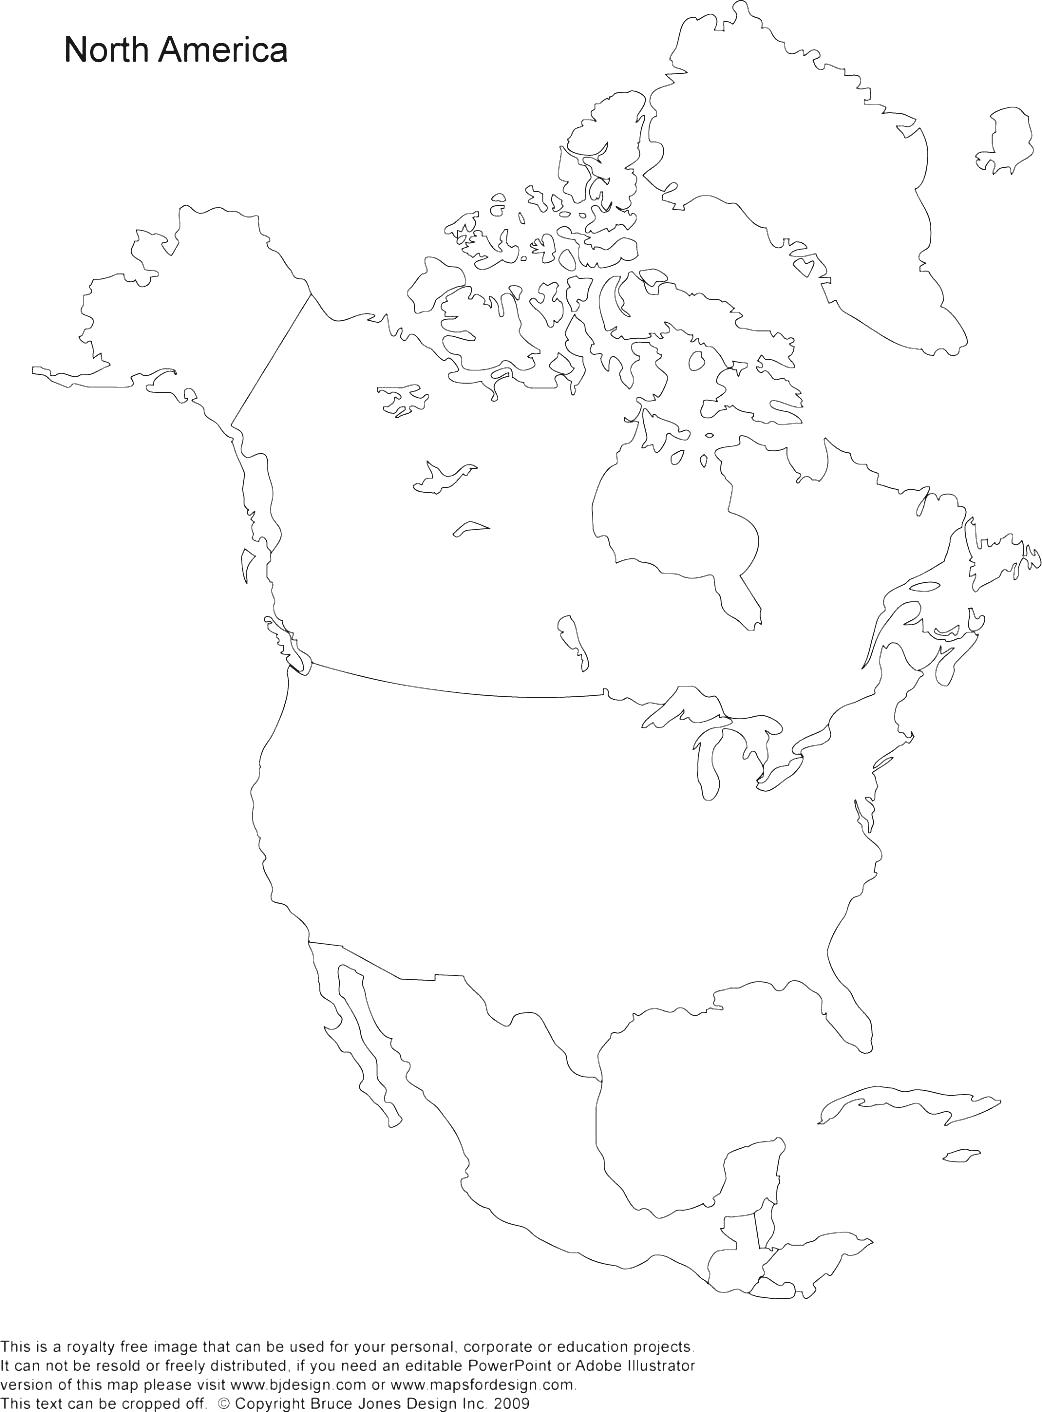 North America Map Outline Empty Usa Canada Blank.